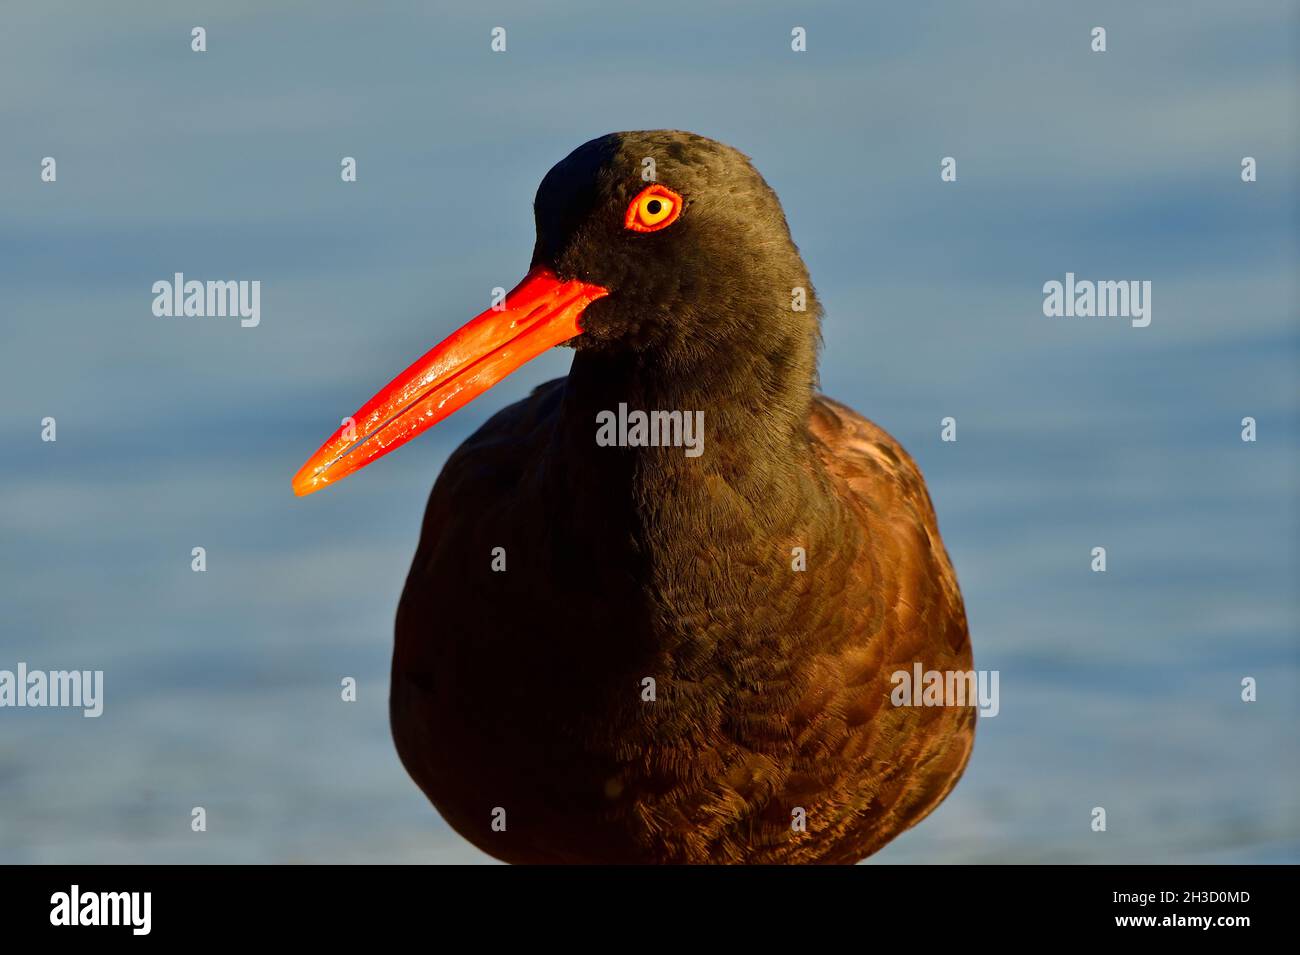 A portrait image of a Black Oystercatcher shorebird (Haematopus bachmani)  in the early morning light foraging  on the shore of Vancouver Island Stock Photo